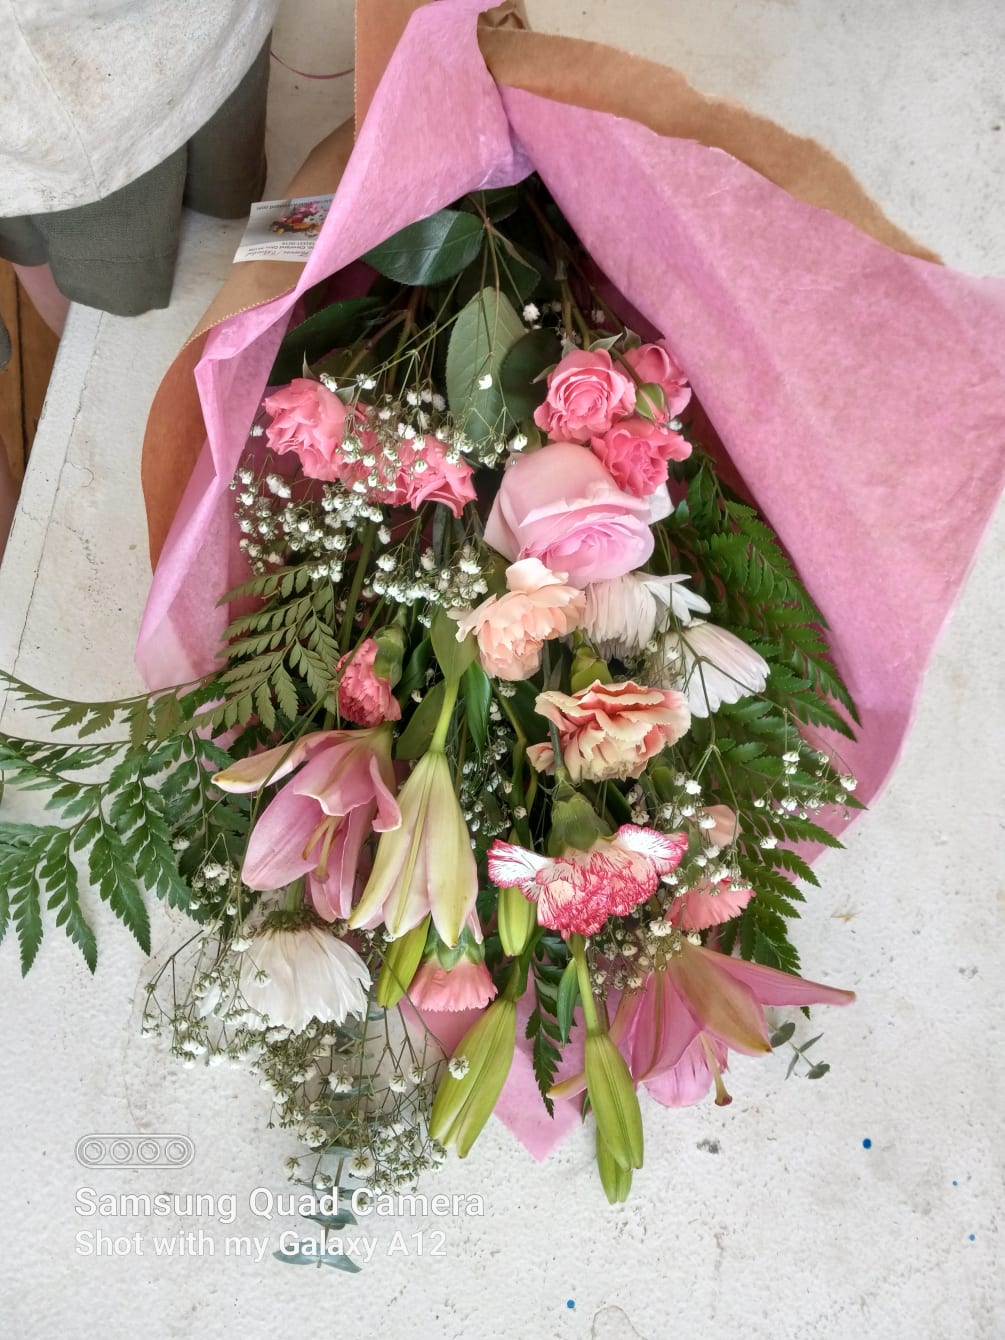 Variety of all pink flowers including roses, tulips, carnations, Larkspur and lilies